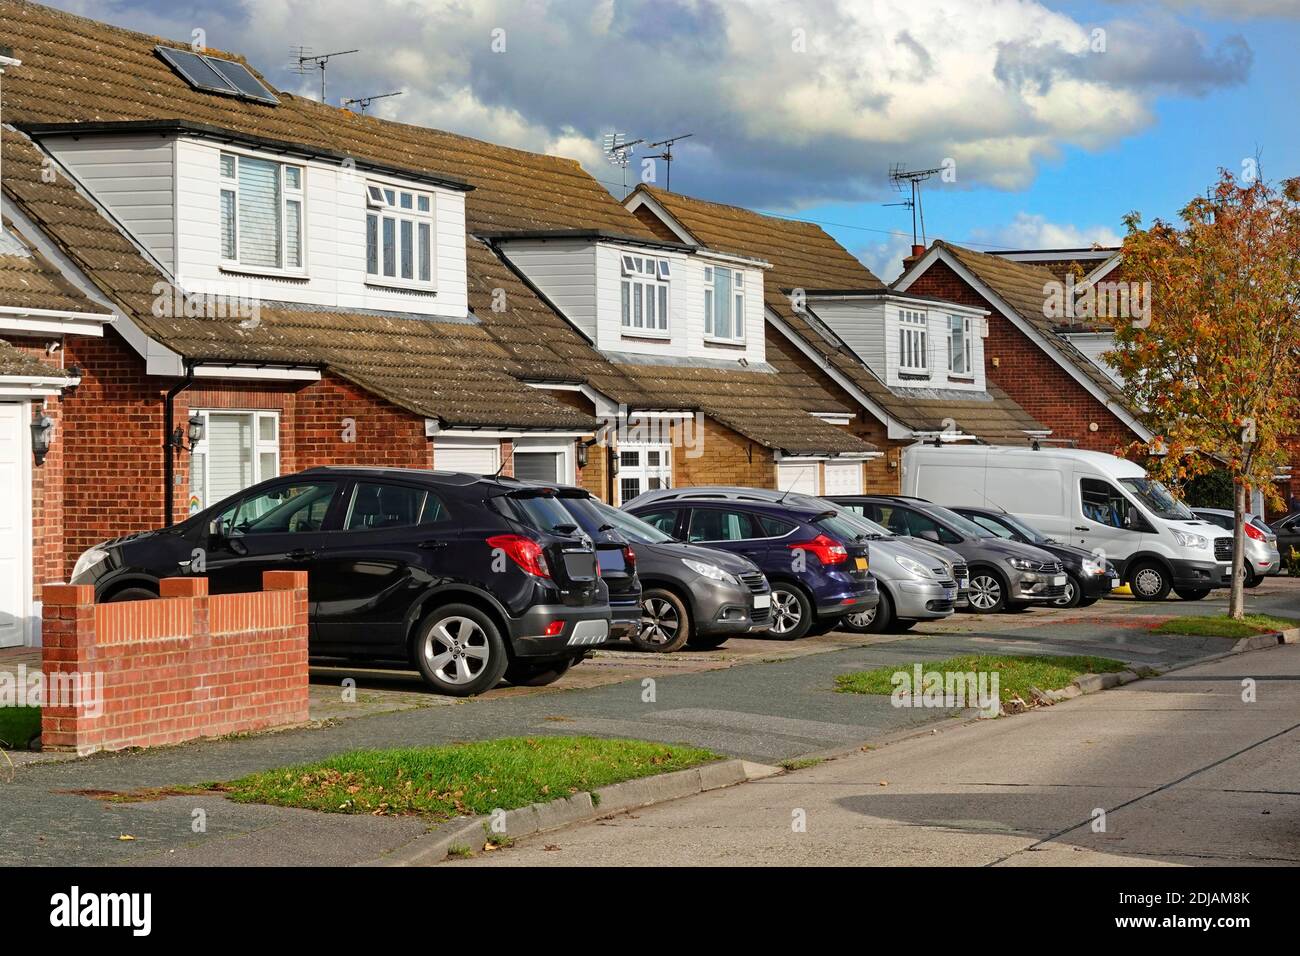 Residential street scene car parking off road & houses with cars & van on original lawn front gardens now concrete space for vehicles Essex England UK Stock Photo